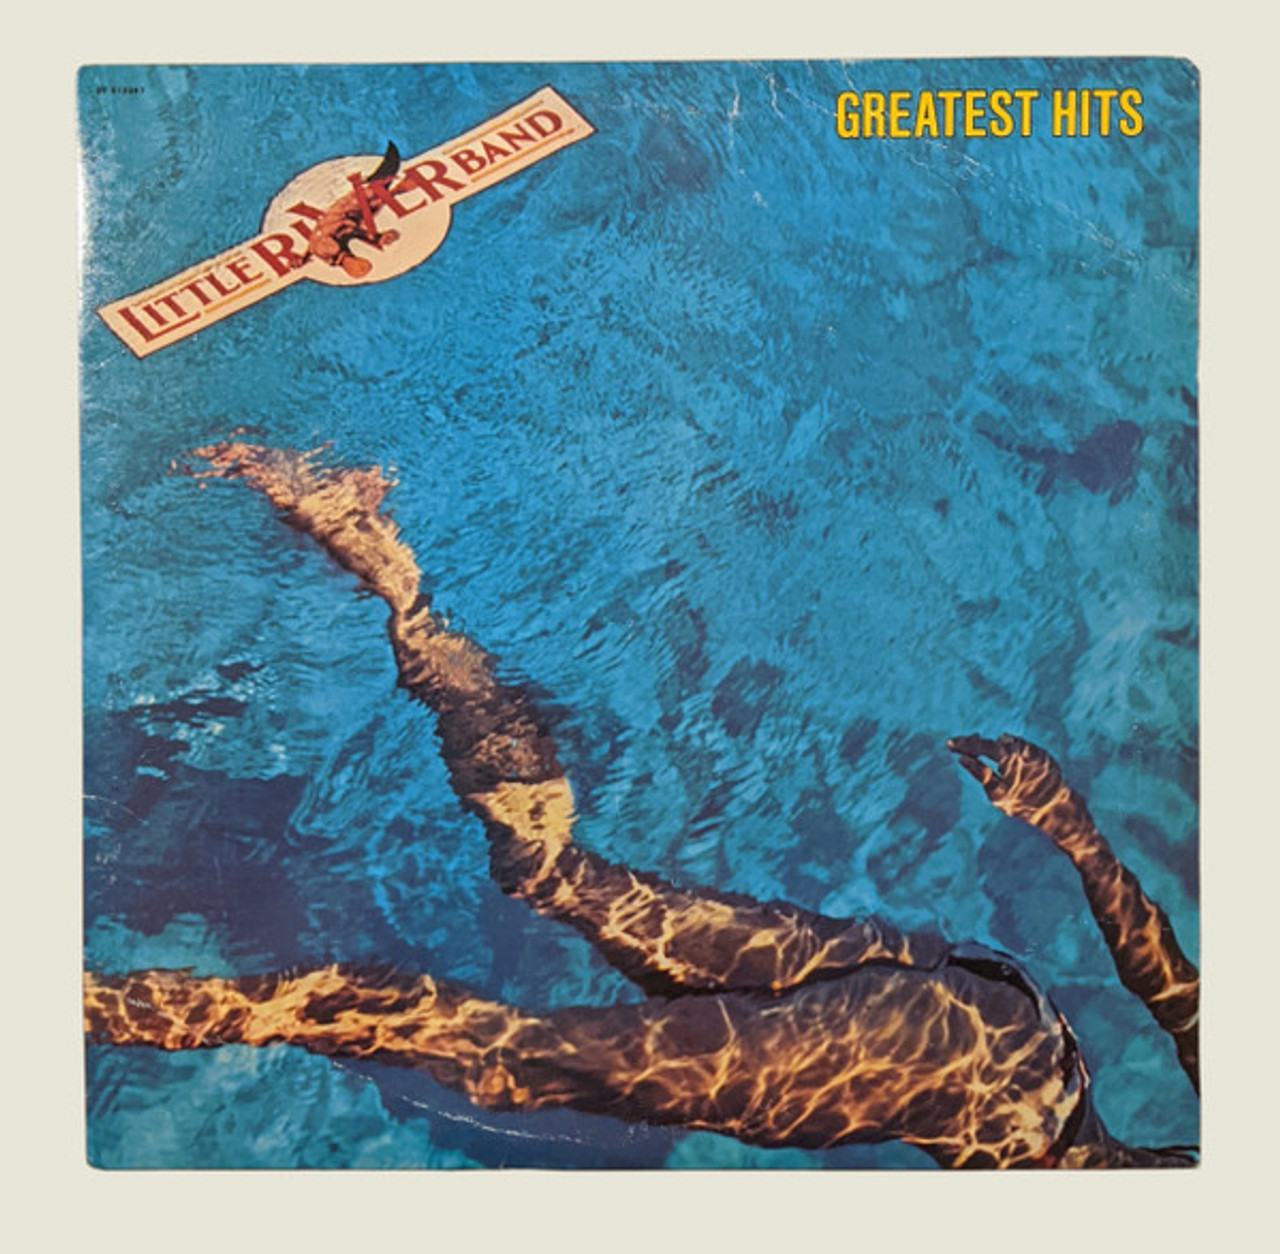 USED* Greatest Hits - Little River Band (#490393688860) - Omega Music